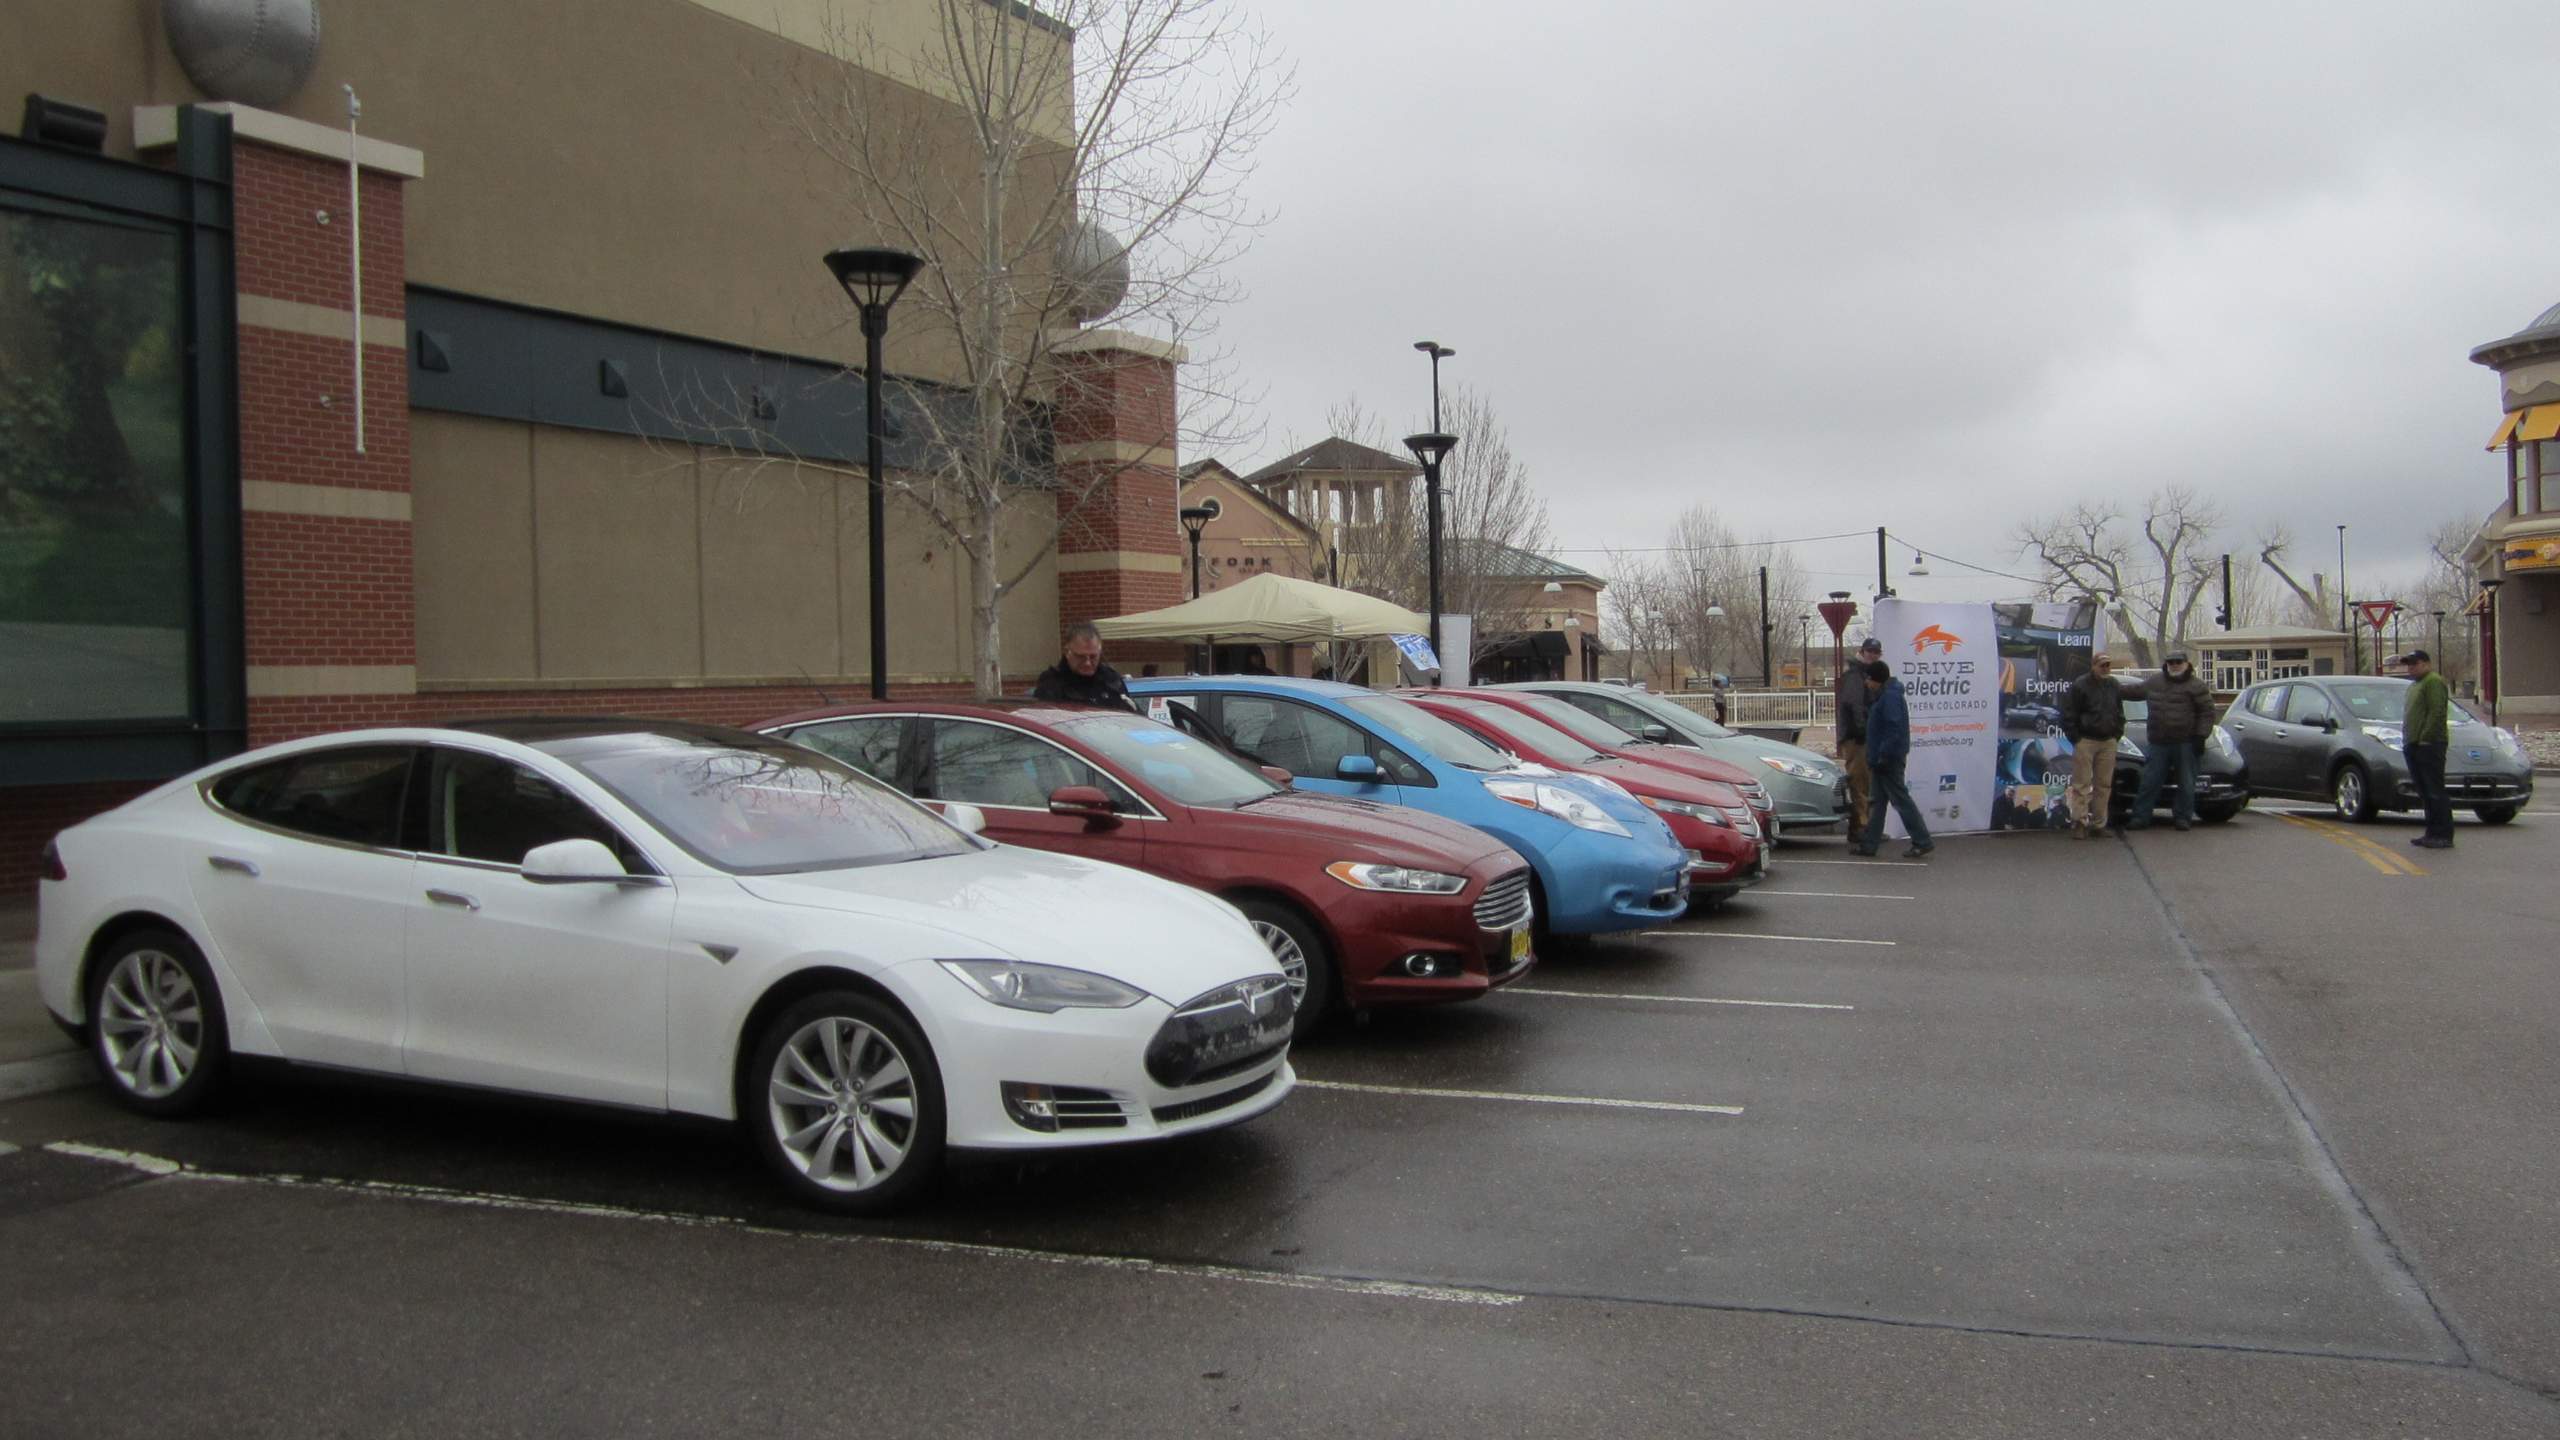 At the DENC Centerra event, we had a Tesla Model S, Ford Fusion Energi, Nissan Leafs, Chevy Volts, Ford C-Max, and a Ford Focus EV.